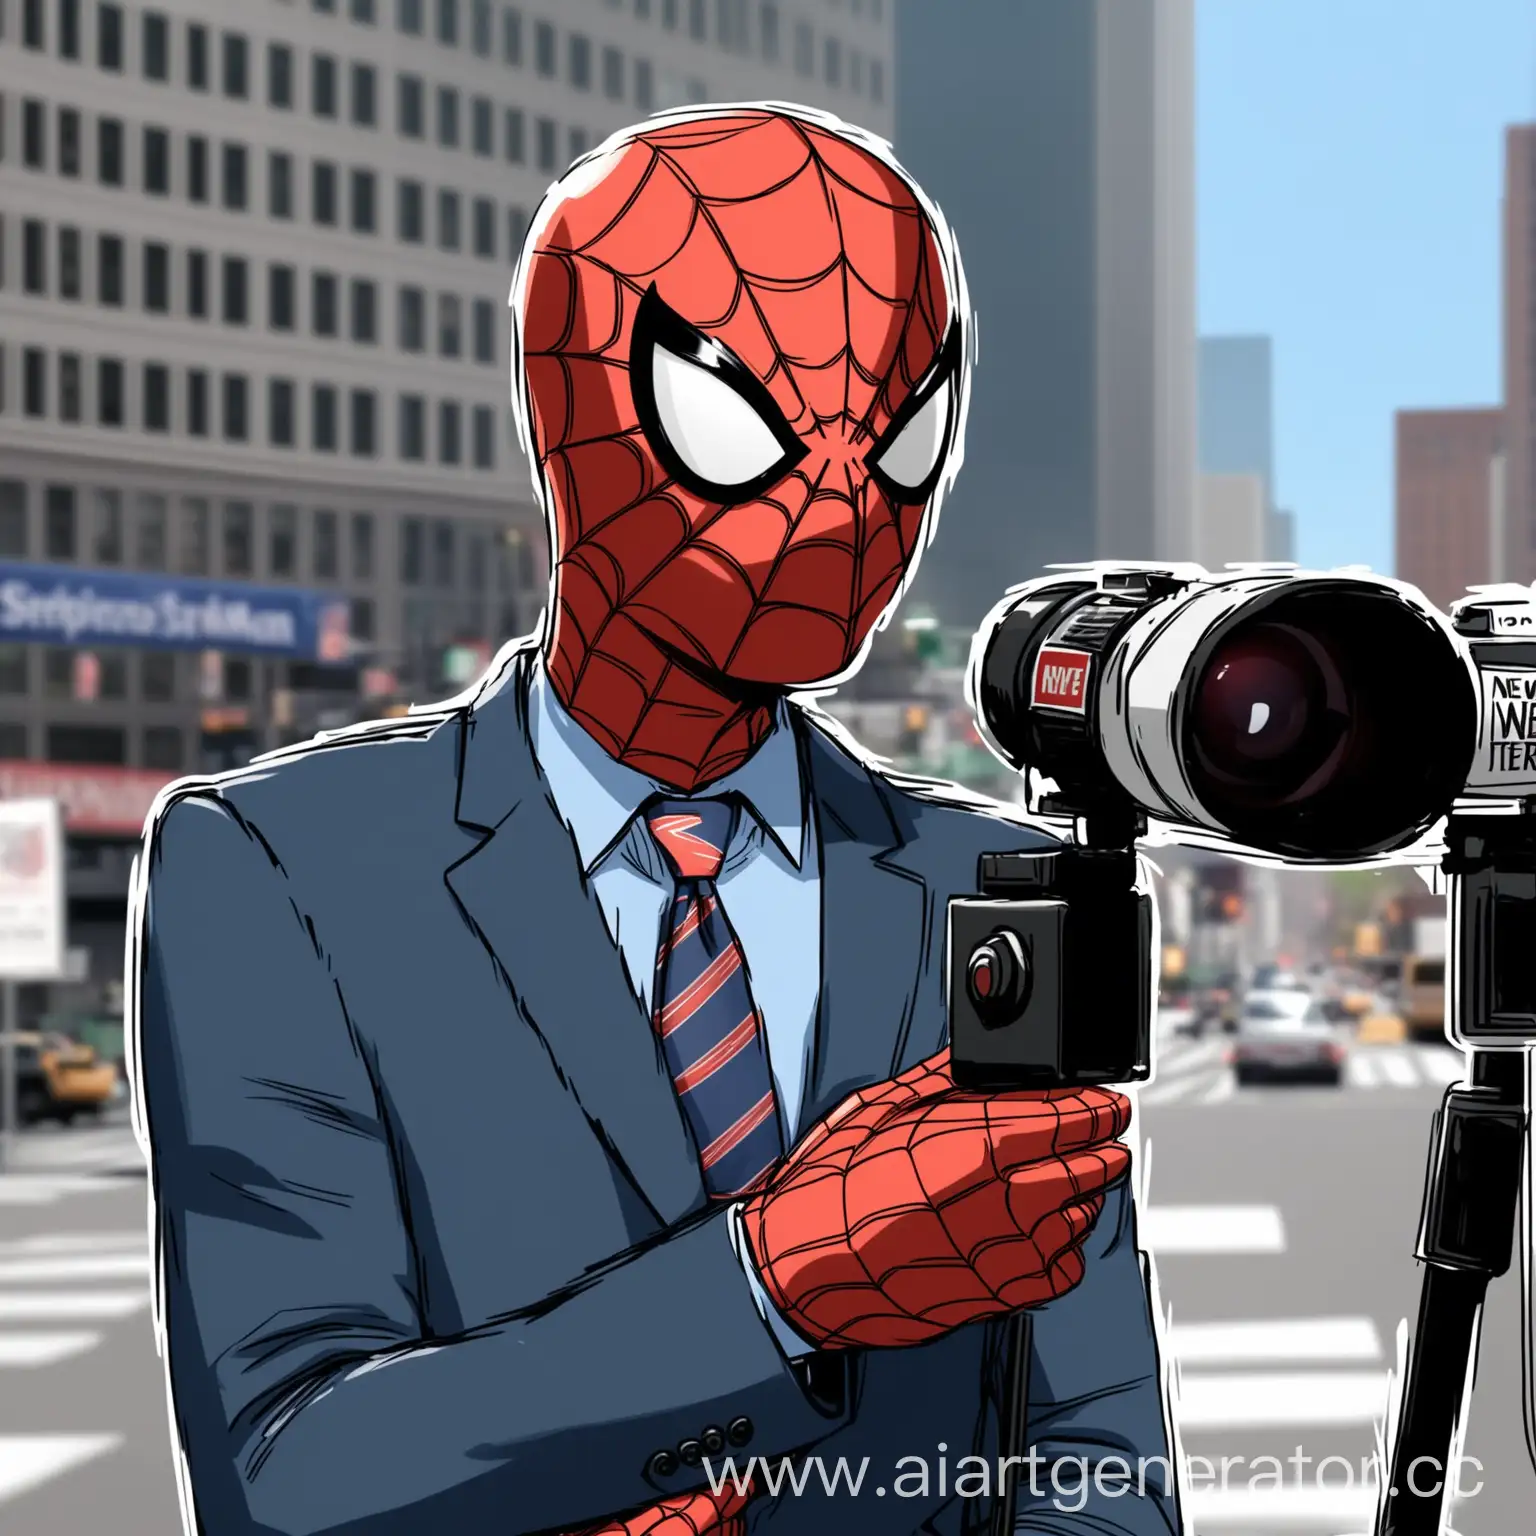 Spider-Man is a news reporter